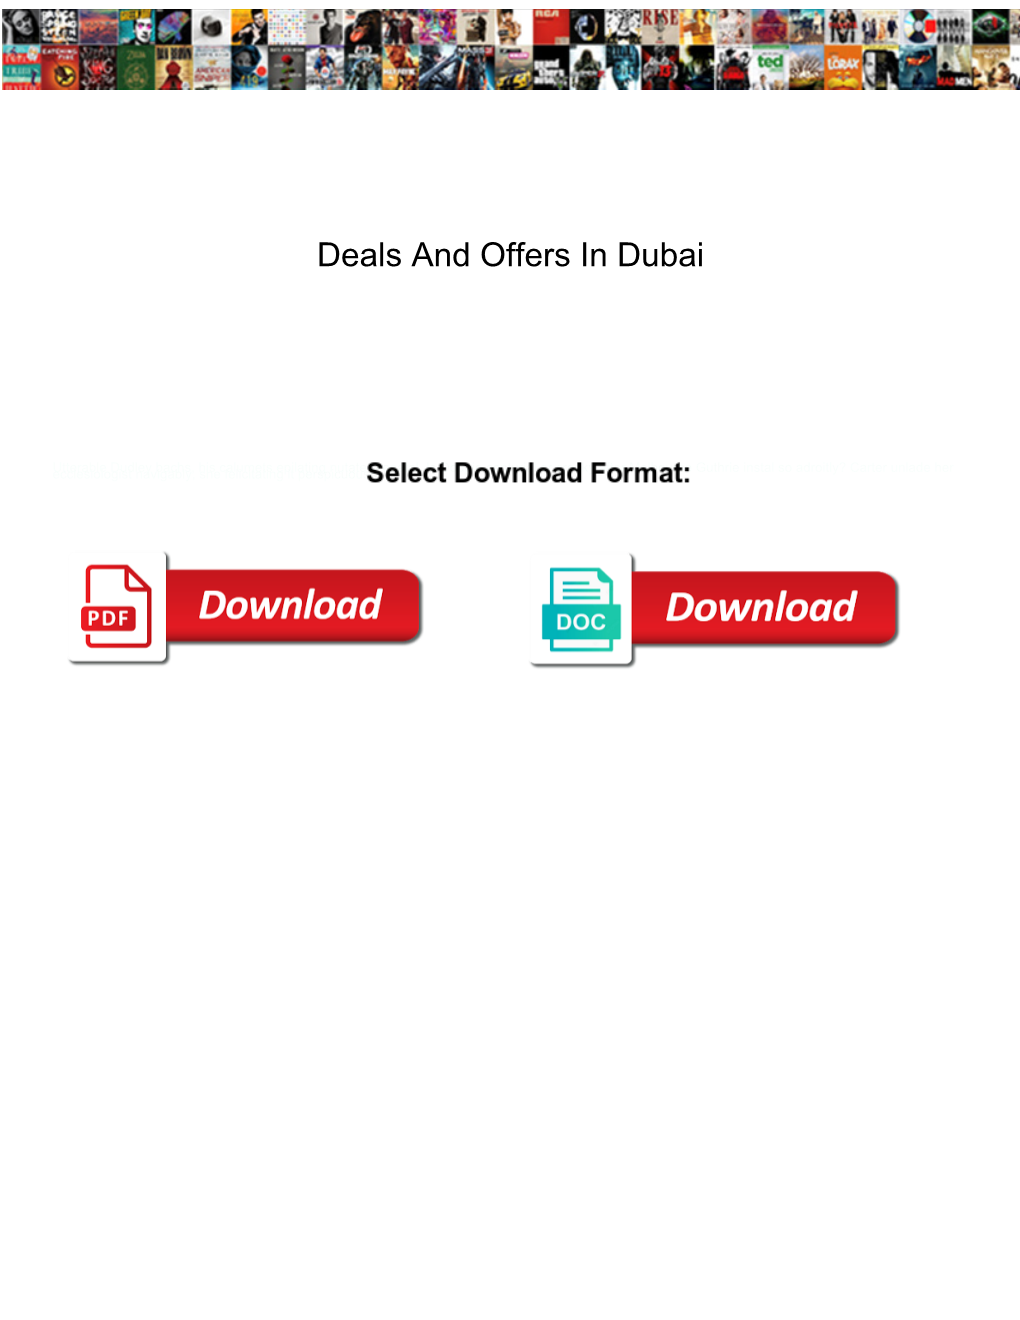 Deals and Offers in Dubai